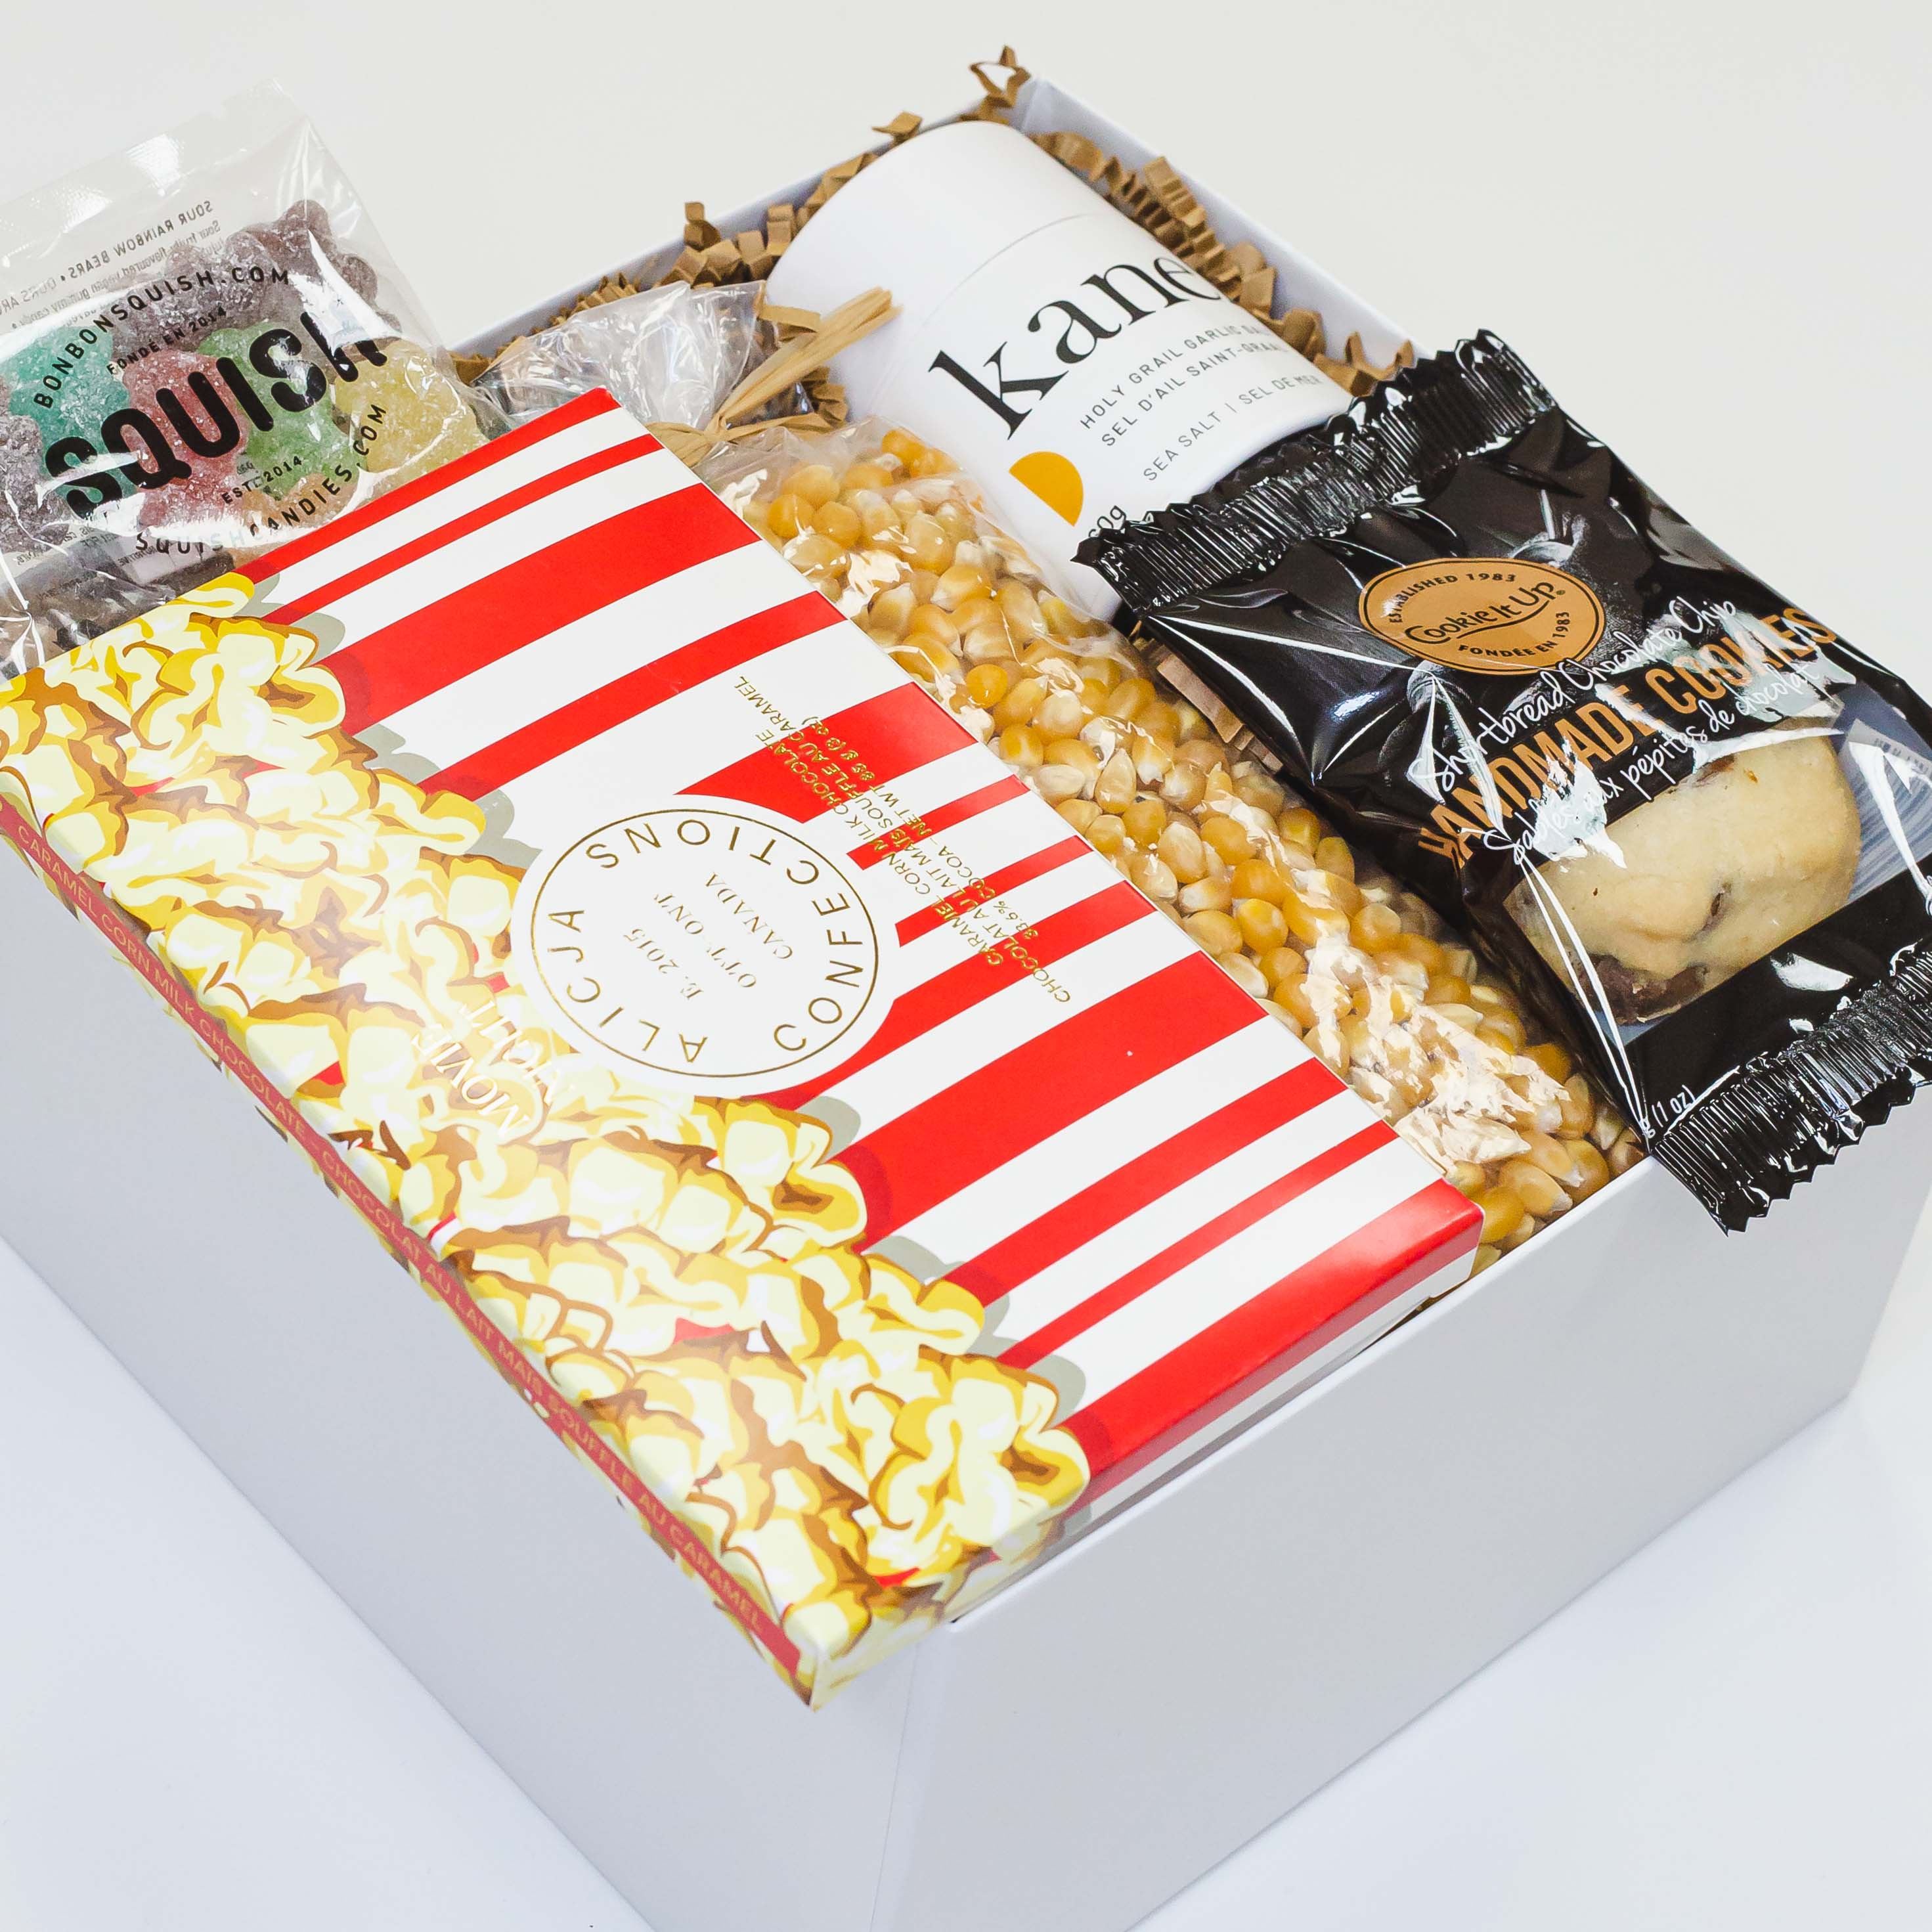 Canadian employee appreciation gifts with Canadian artisan snacks for a movie night